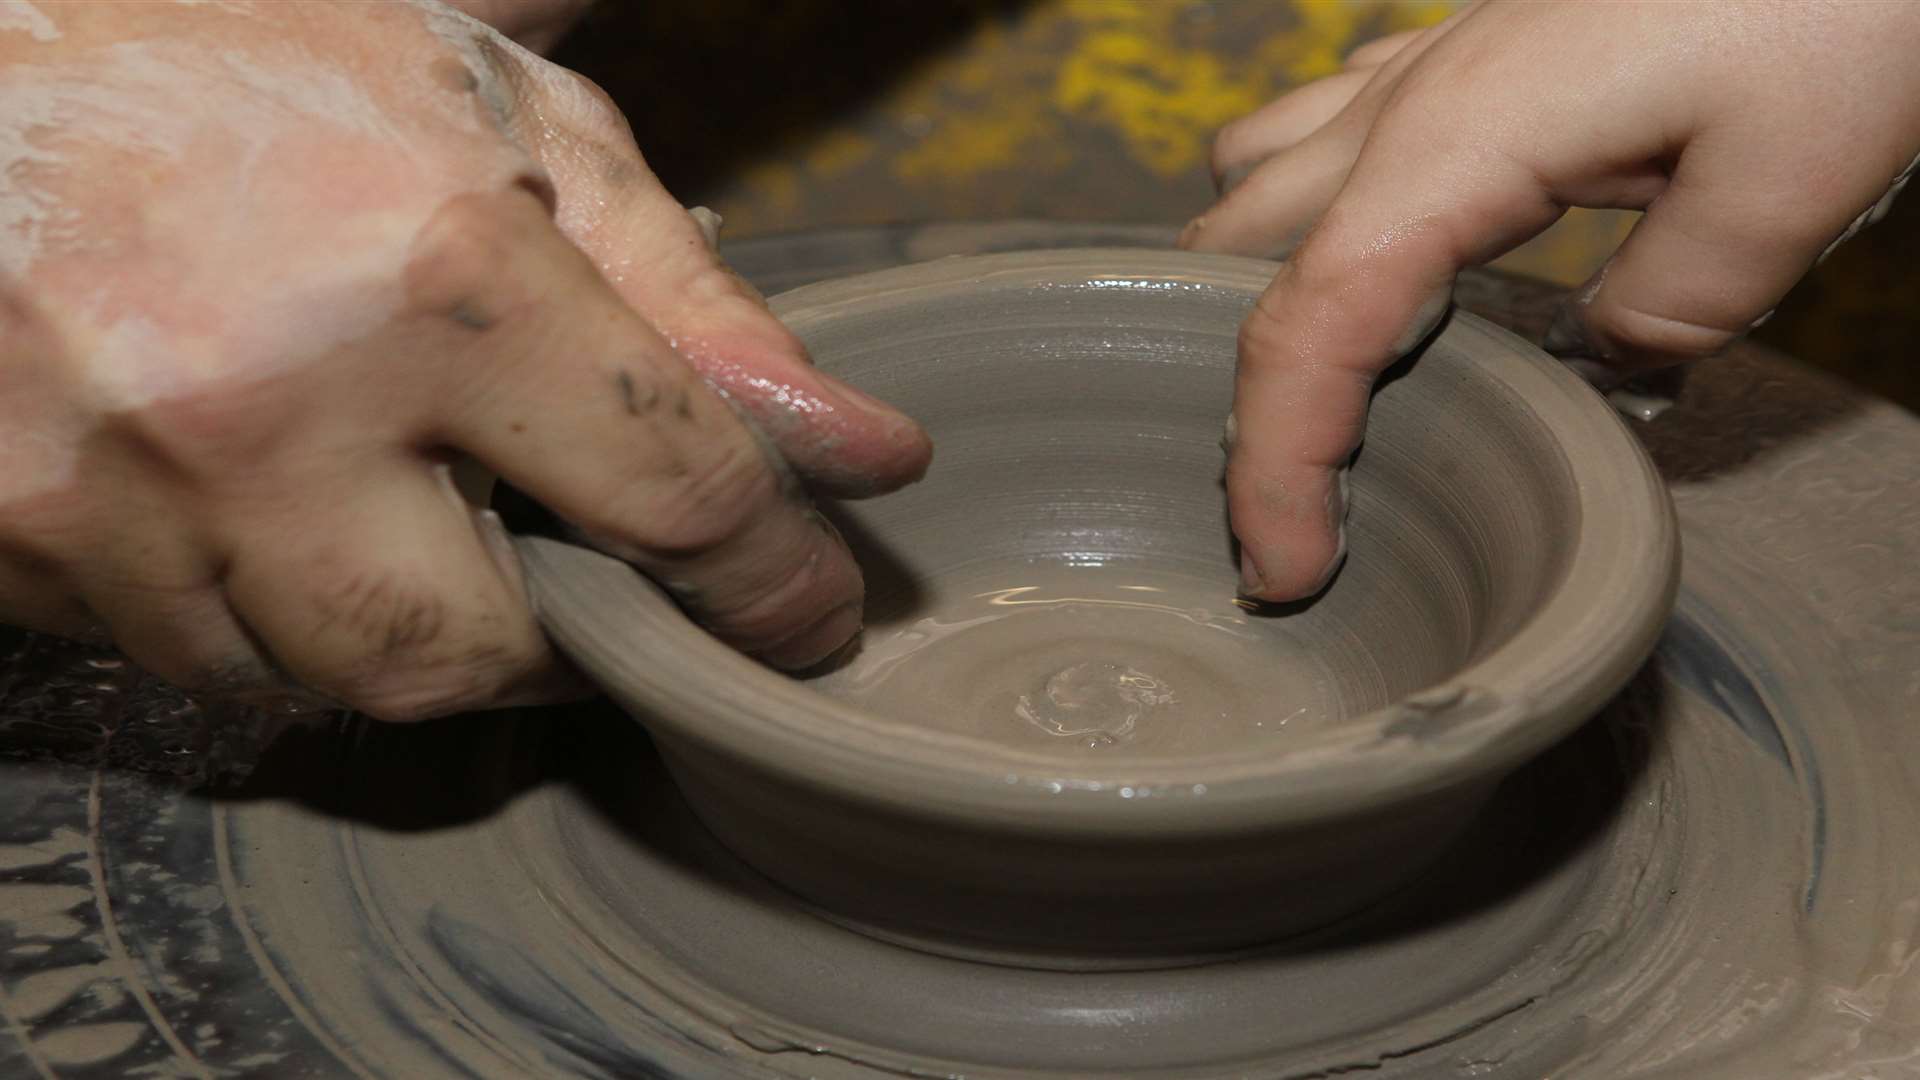 Have a go on a potter’s wheel